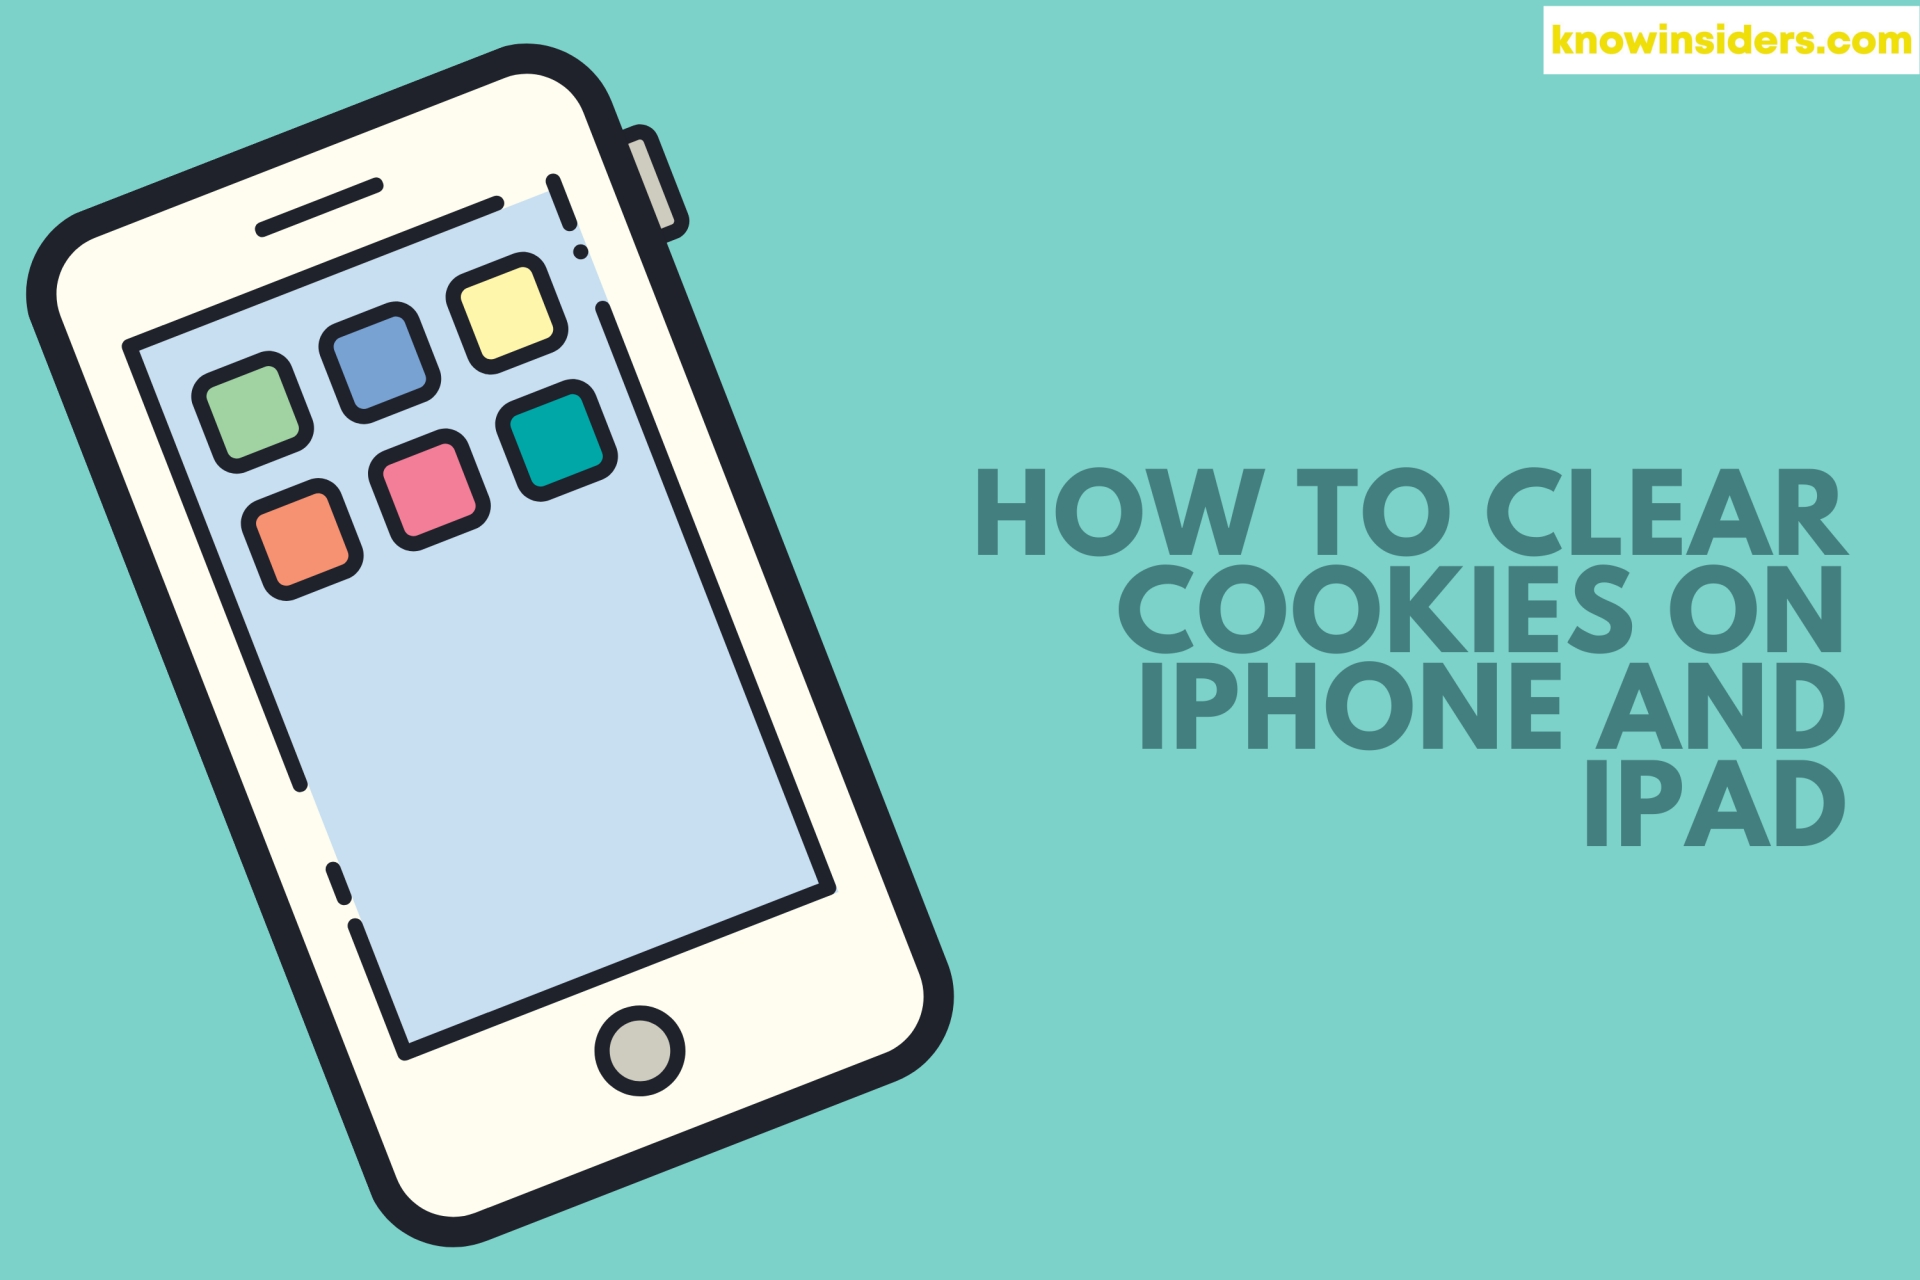 How To Clear Cookies On iPhone and iPad